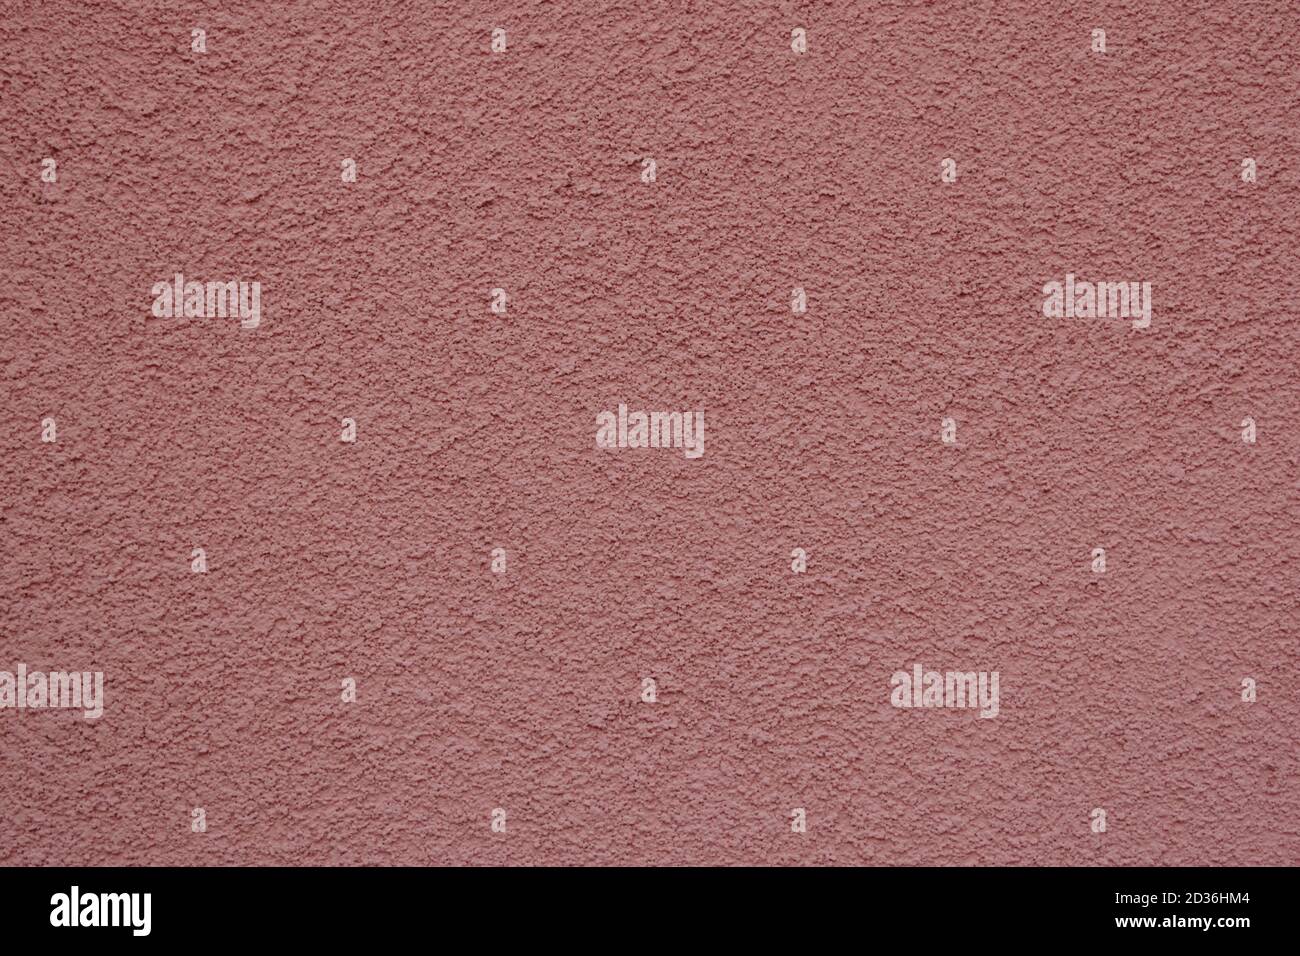 textured concrete wall background.pink gritty surface Stock Photo